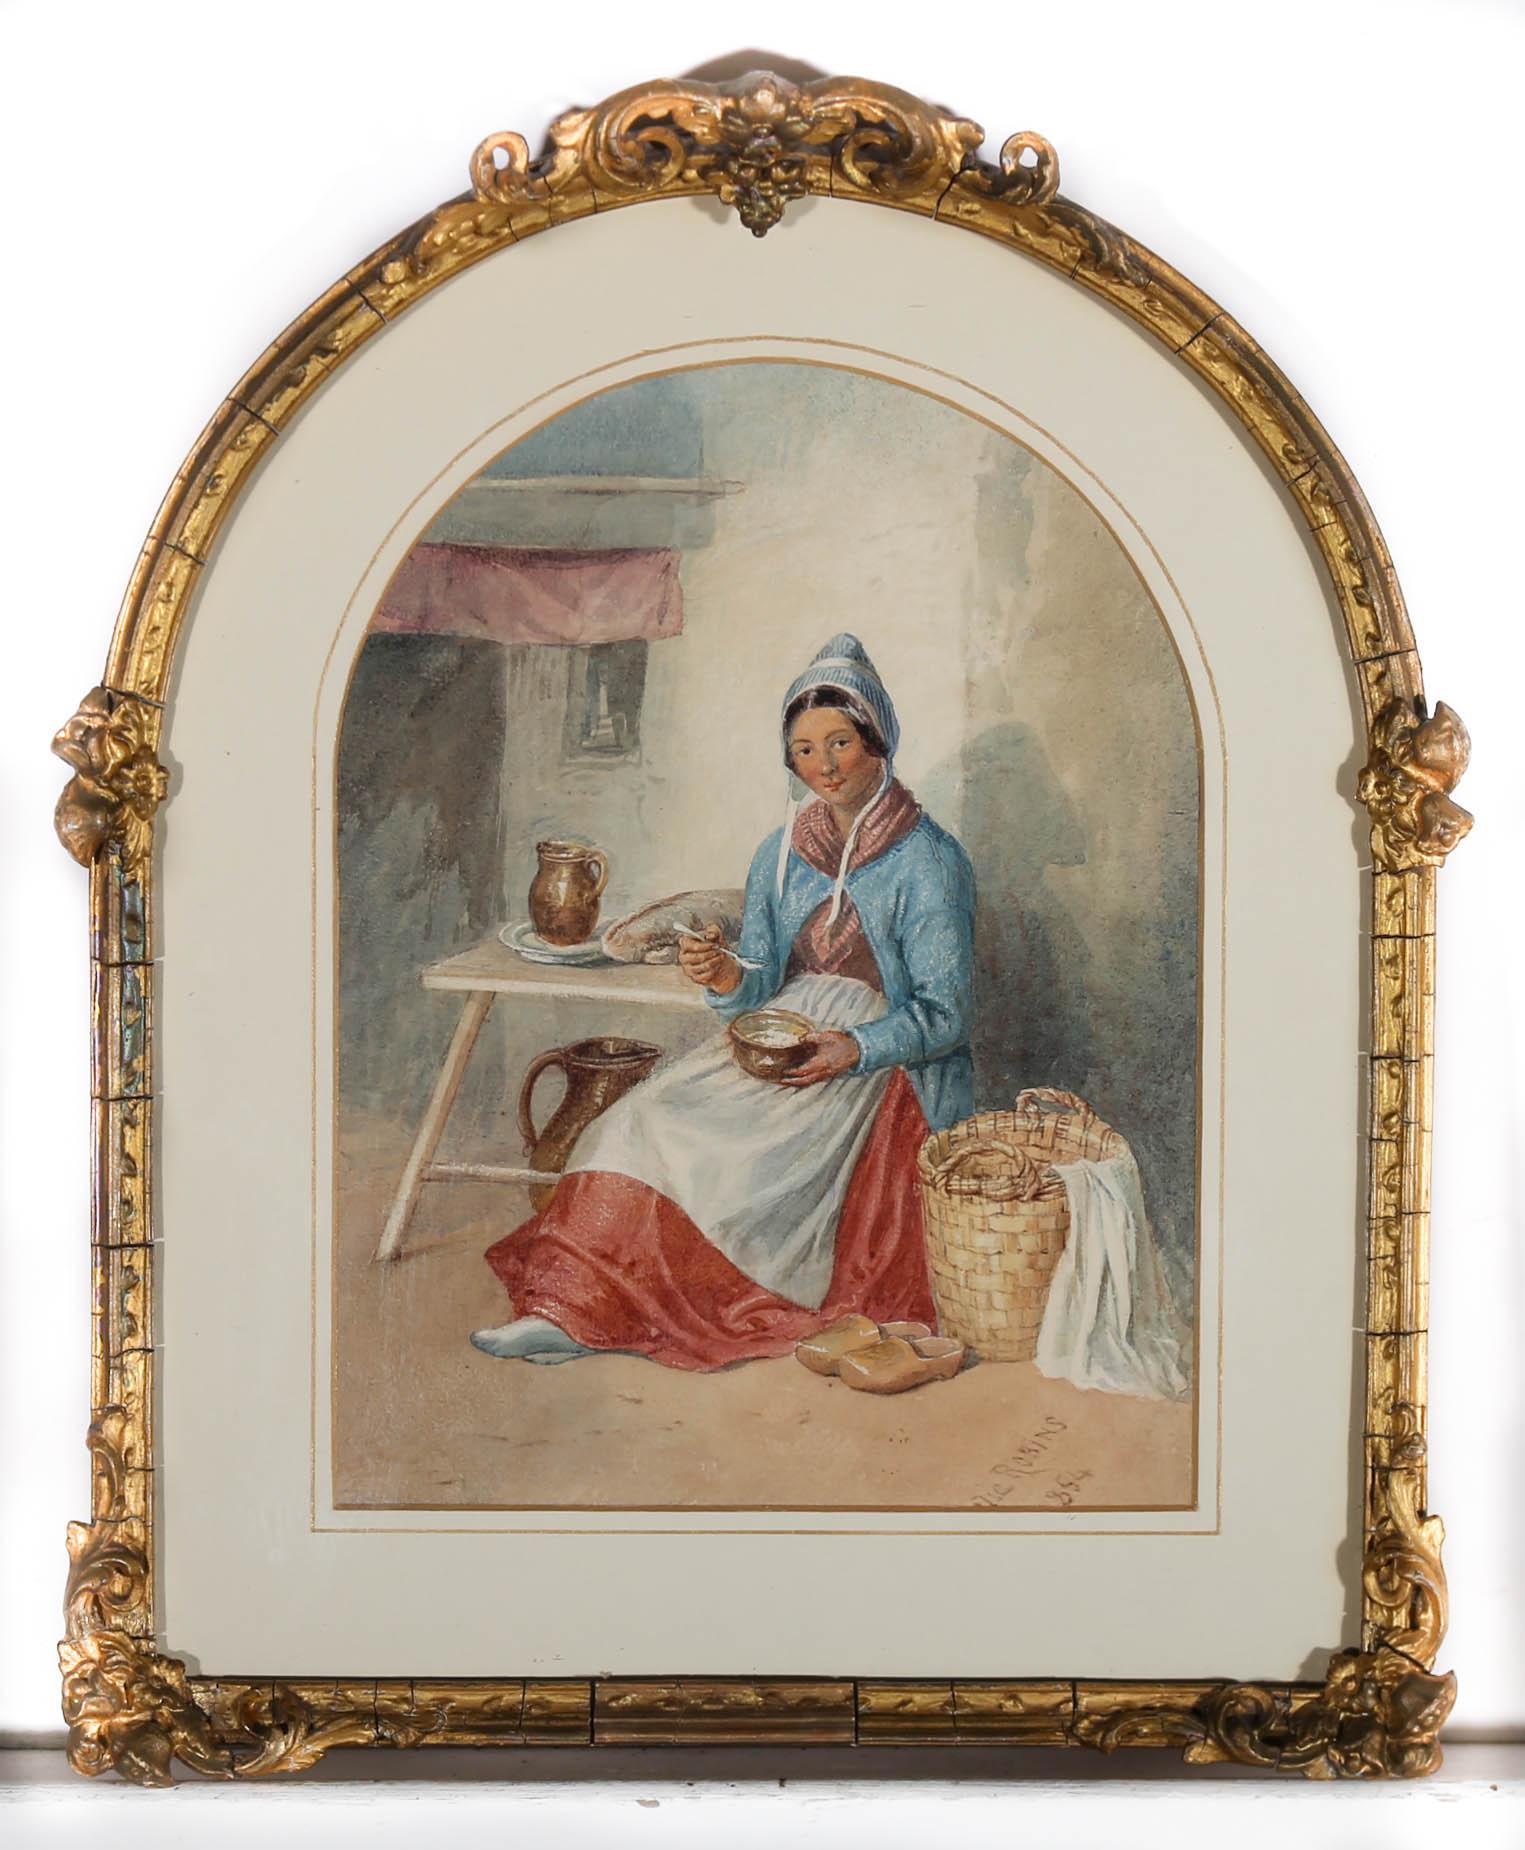 This delightful scene depicts a maid enjoying her dinner at the end of a long day. She has kicked her shoes to the side and stretches her legs out, long skirts falling around her side. The artist captures, charming, intricate details such as the